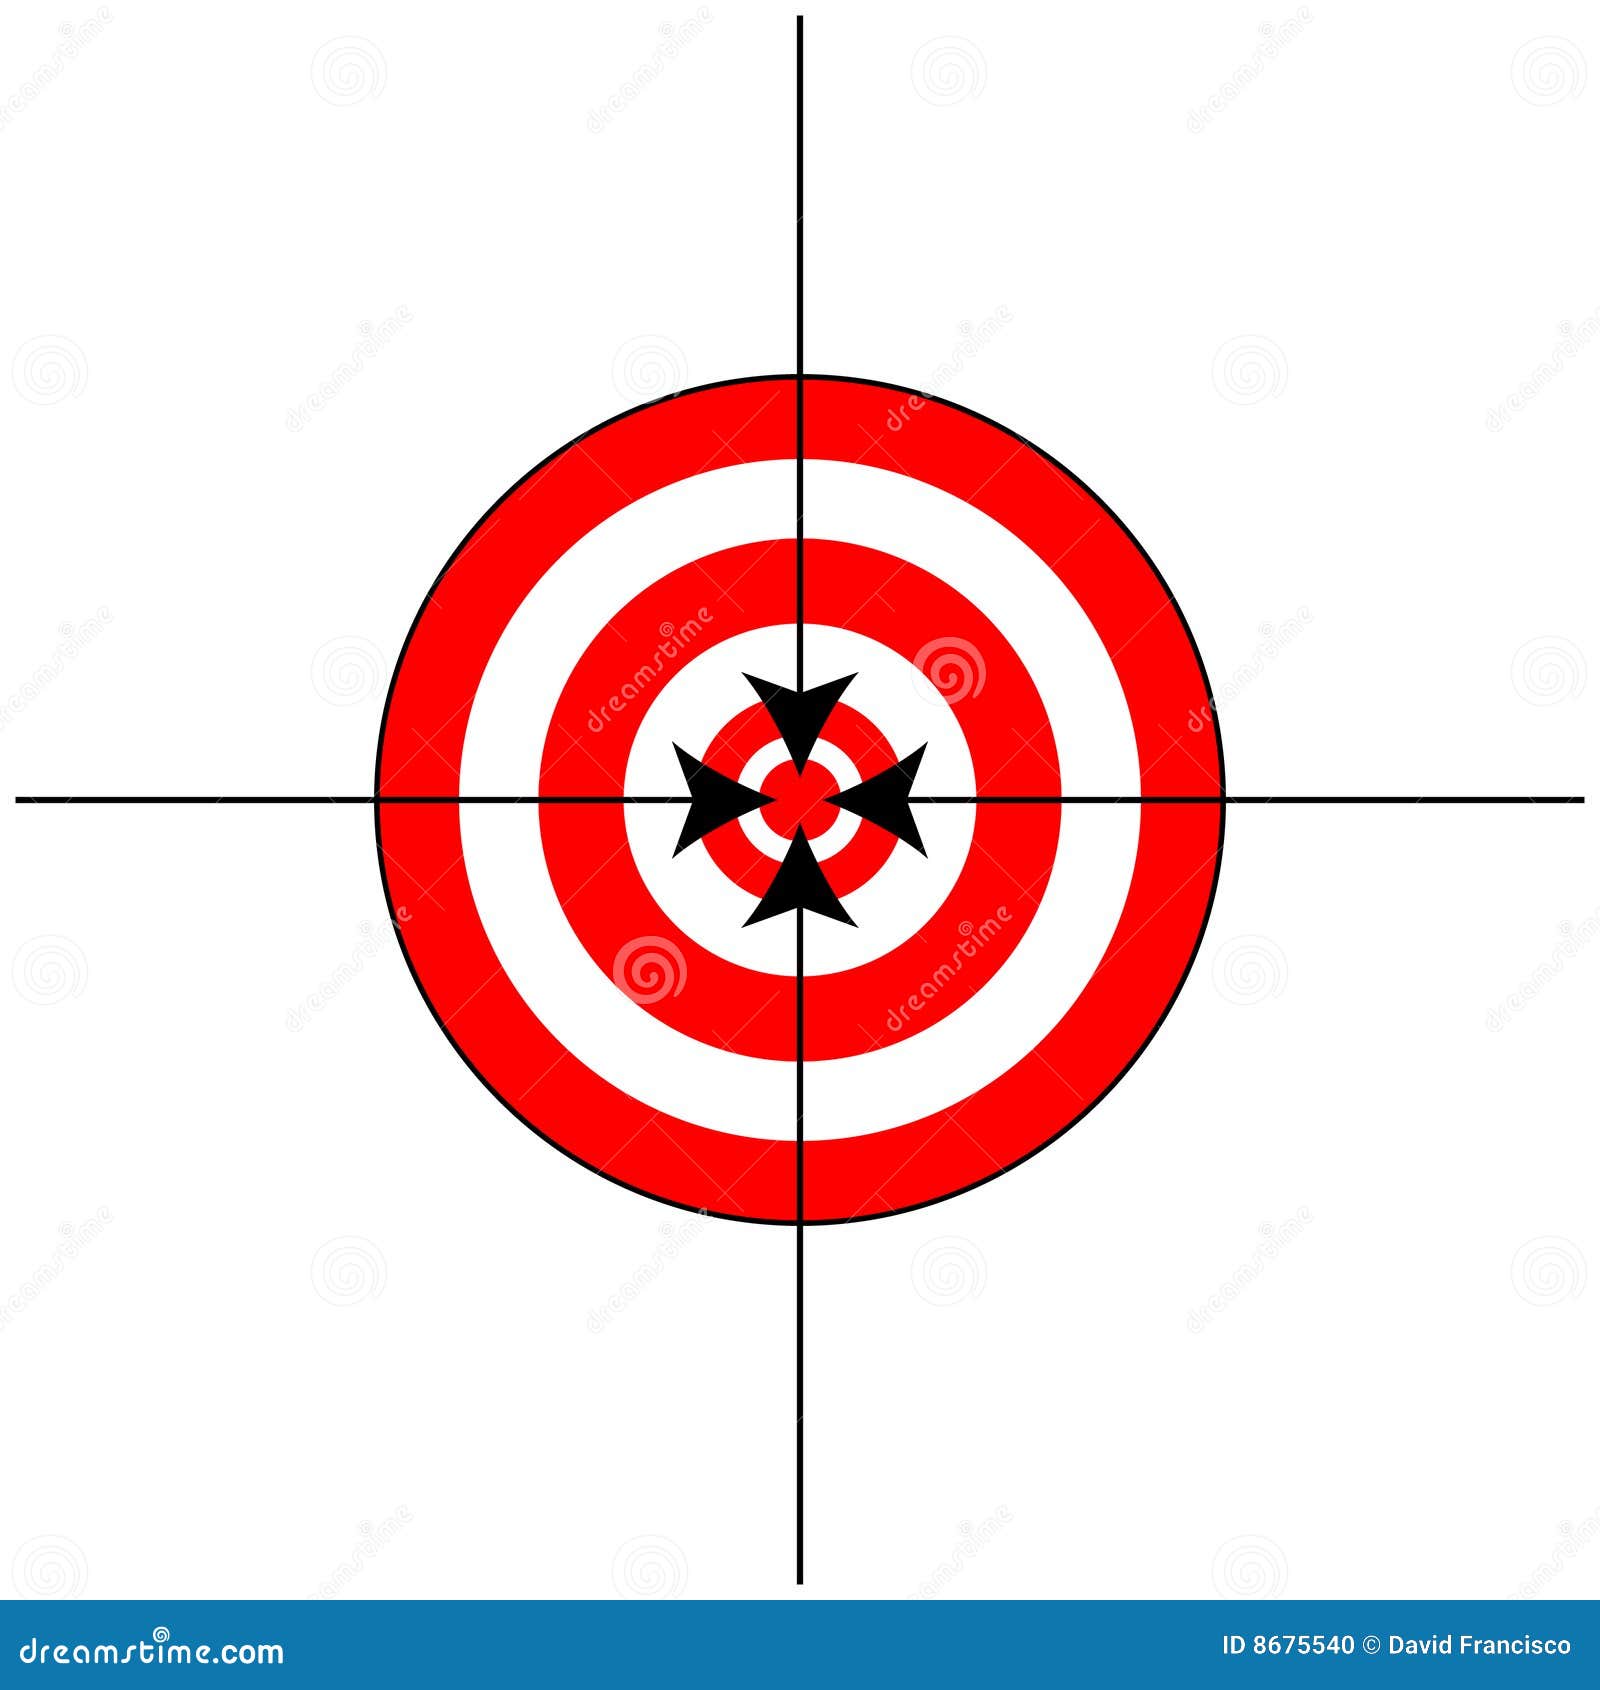 Target Sign With Crosshairs Stock Photo - Image: 8675540